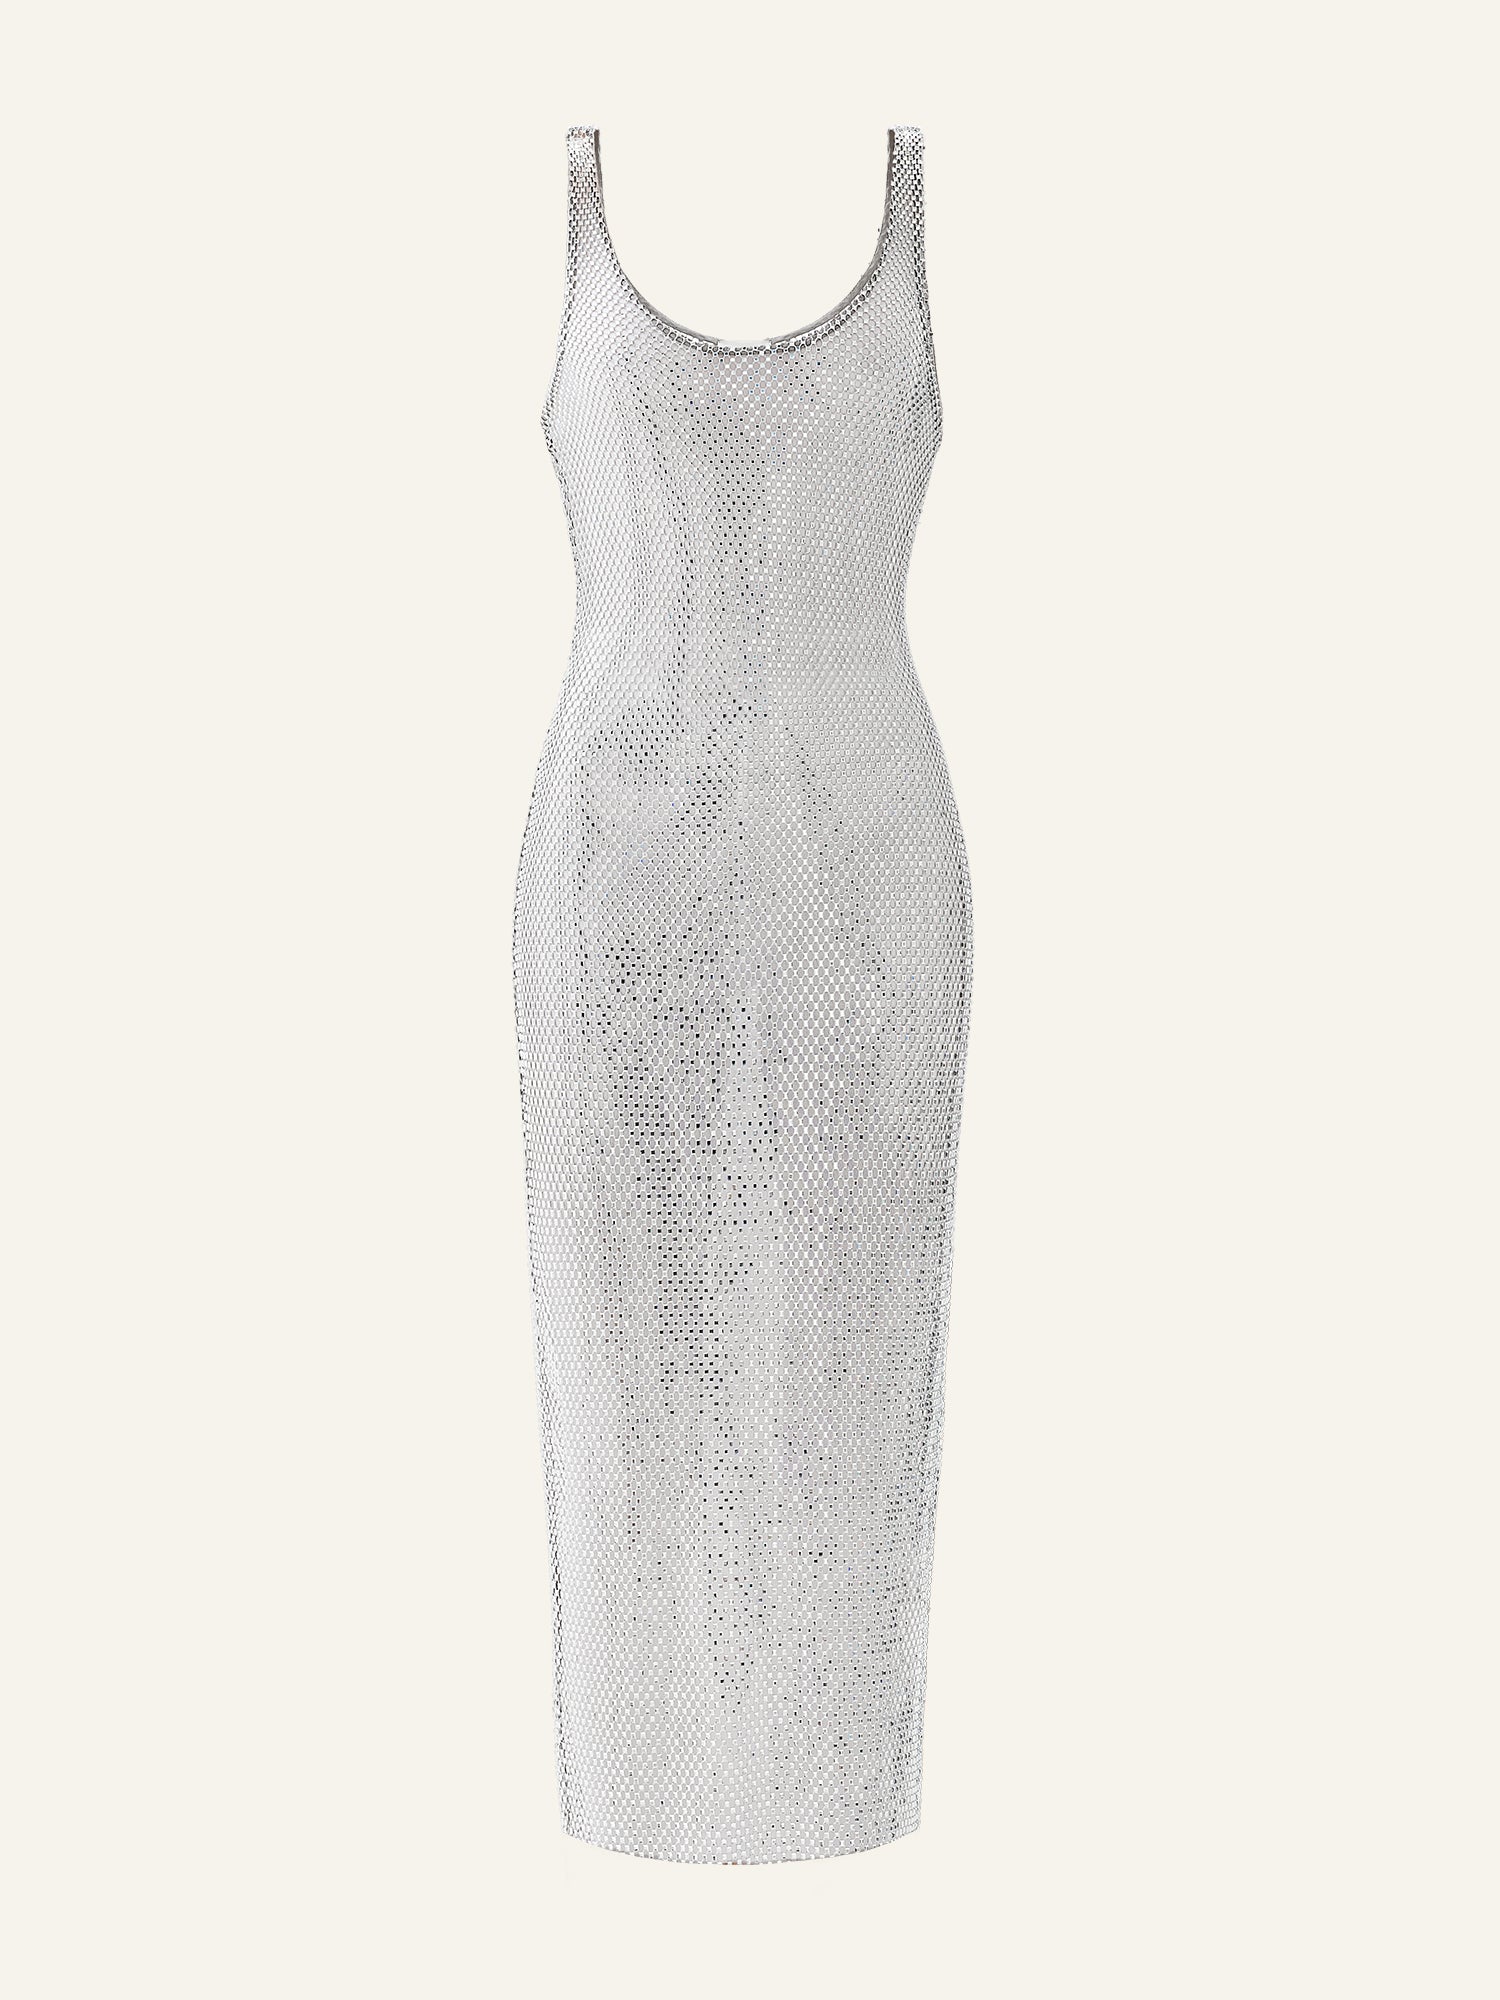 Product photo of a grey net long tank dress decorated with rhinestones and high slit at the back